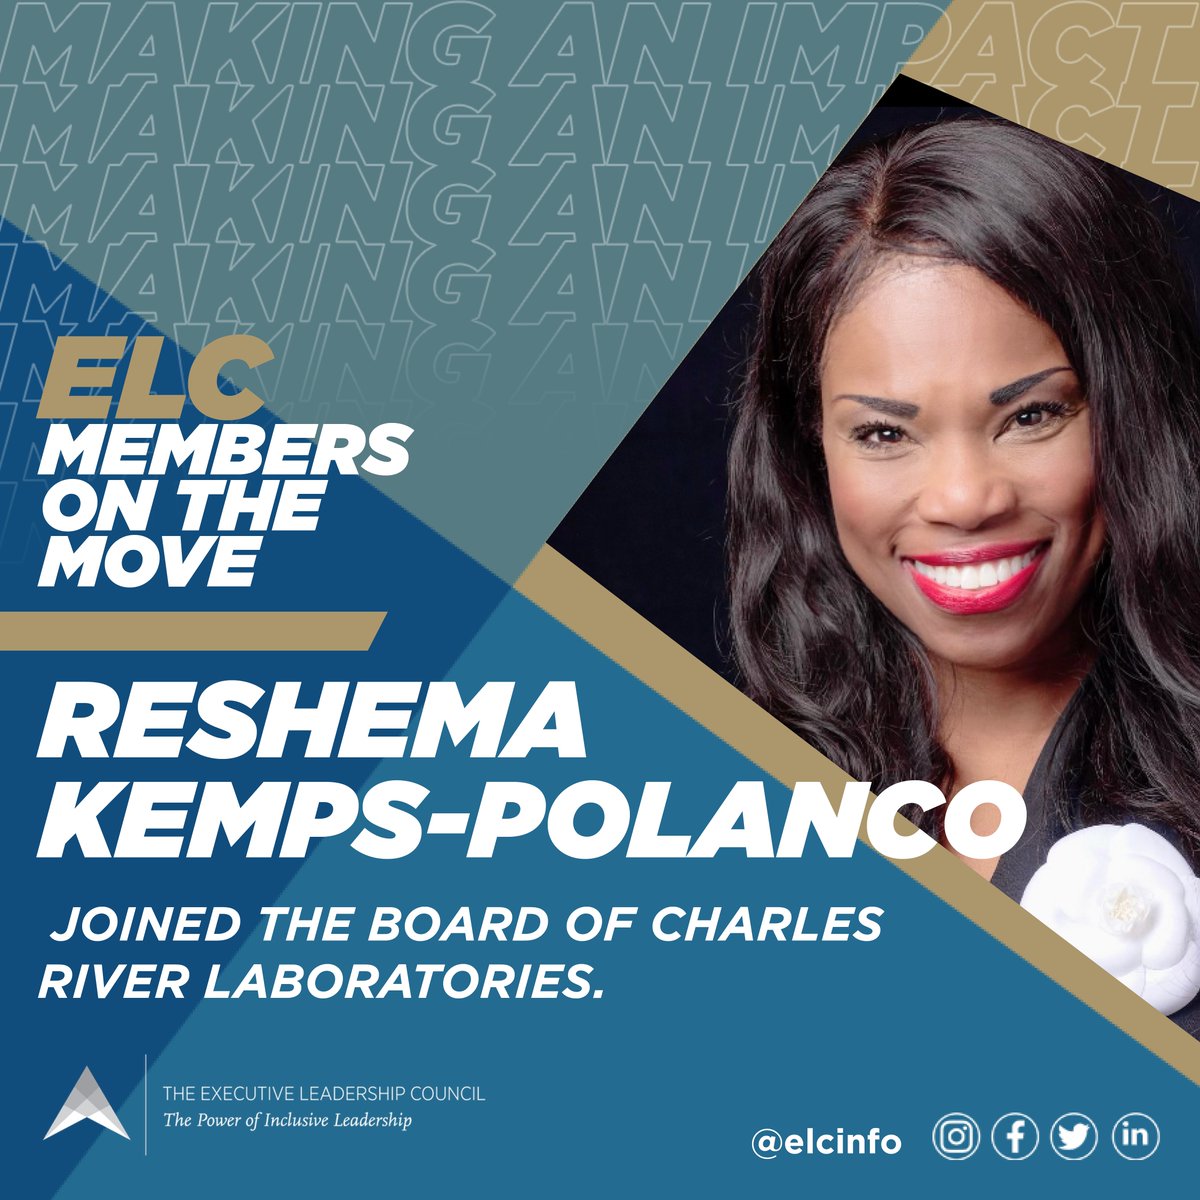 Congratulations to #ELCMember Reshema Kemps-Polanco, who joined the Board of Charles River Laboratories (@CRiverLabs).

#ELCMembersOnTheMove #BlackWomenLead #BlackExecutives #BlackLeadership